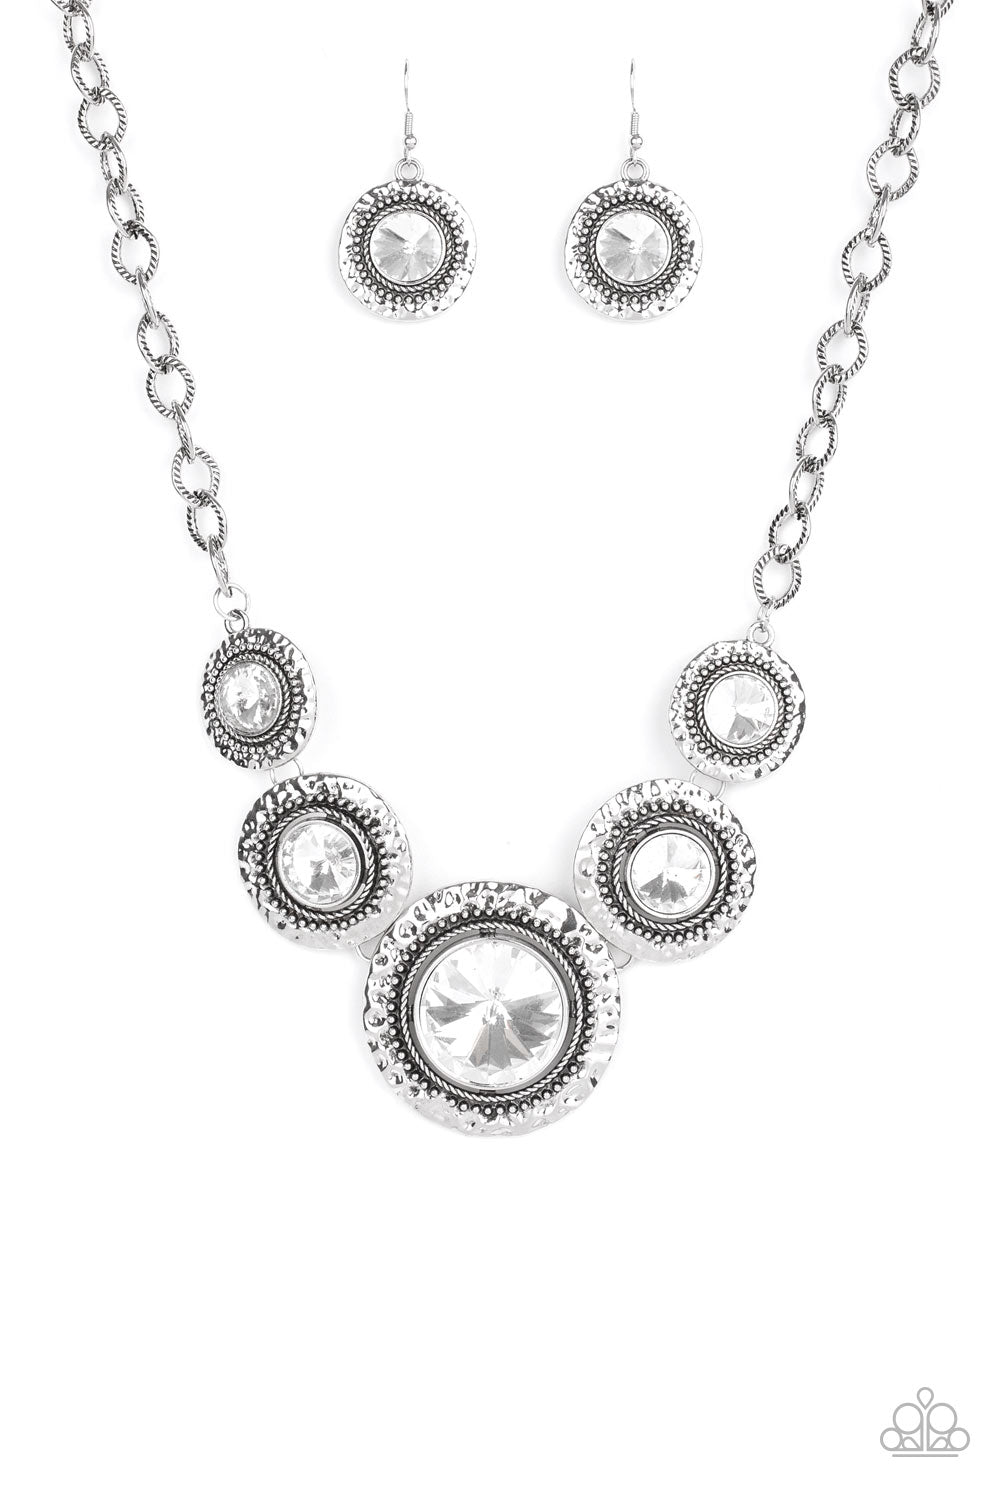 Paparazzi Global Glamour - White Necklace - A Finishing Touch Jewelry